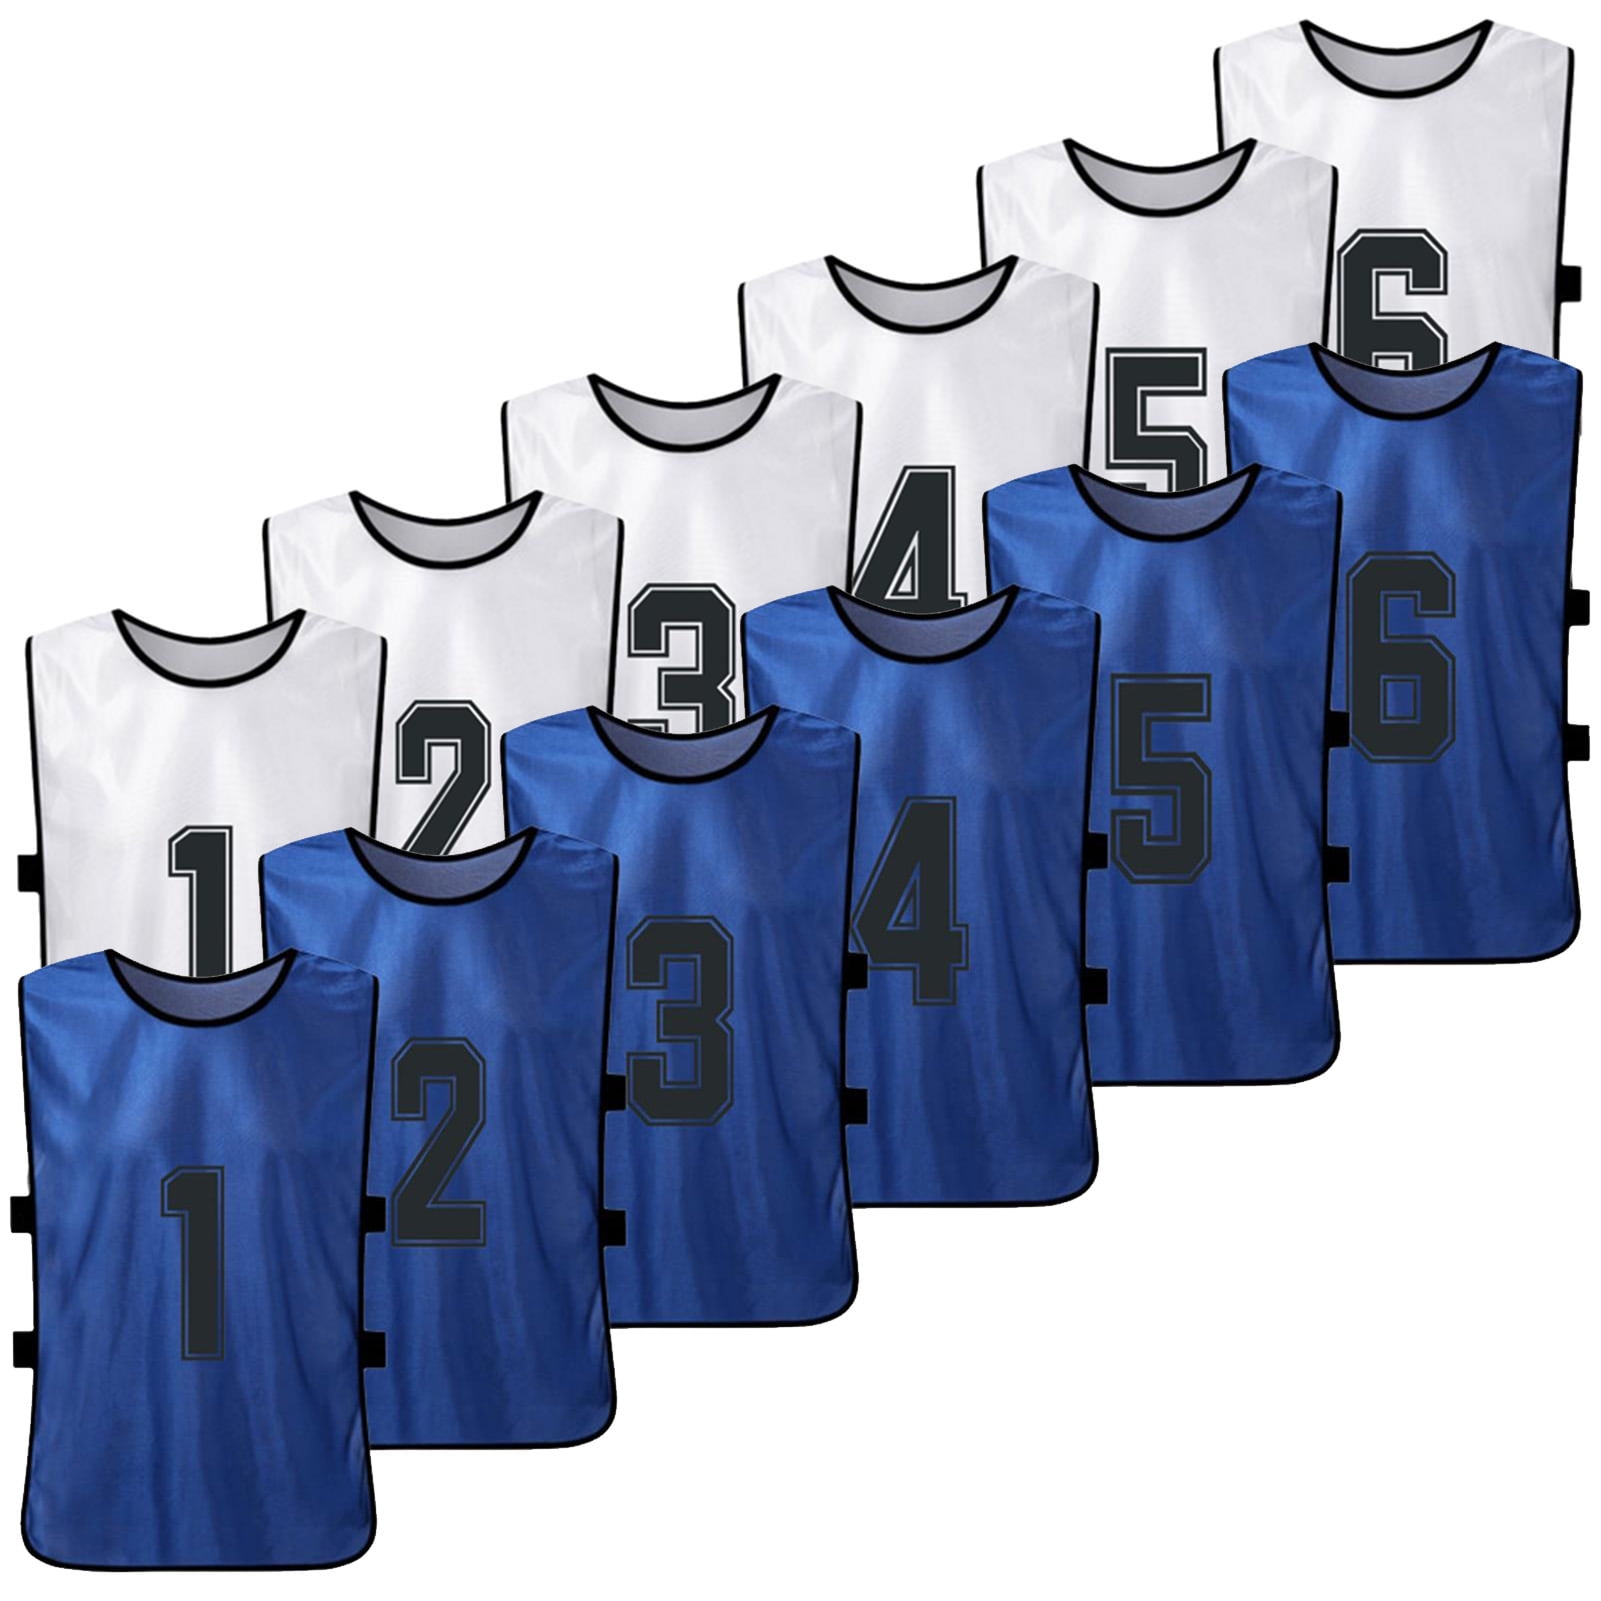 Youth/Adults Pinnies Practice Team Jerseys Stain Scrimmage Training Vest Sports 